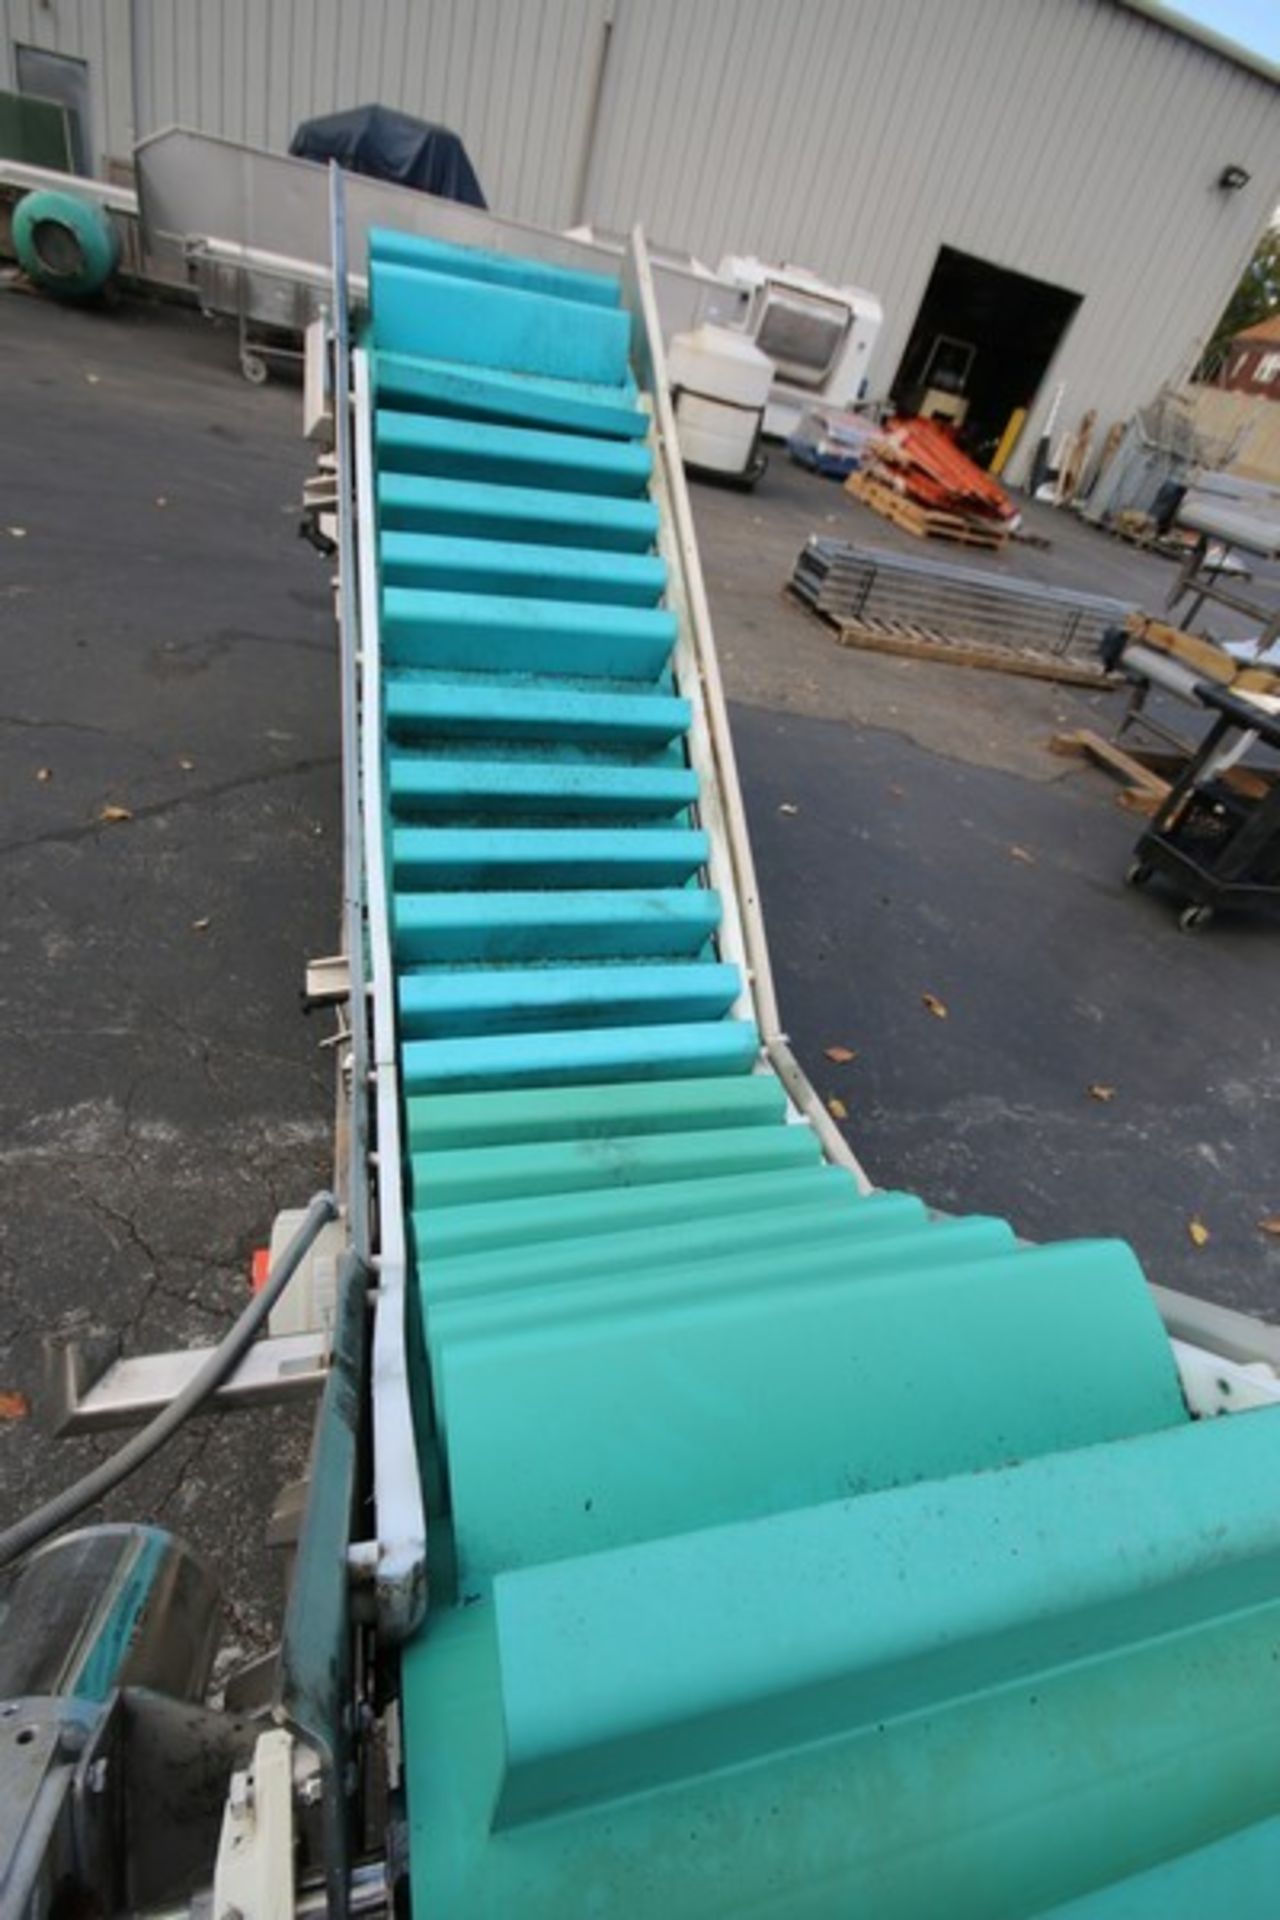 Bryant Aprox. 8' H Z-Configured Conveyor System, with 25" W Belt with 6" Flights, 3/4 & 1/2 hp/ - Image 3 of 4